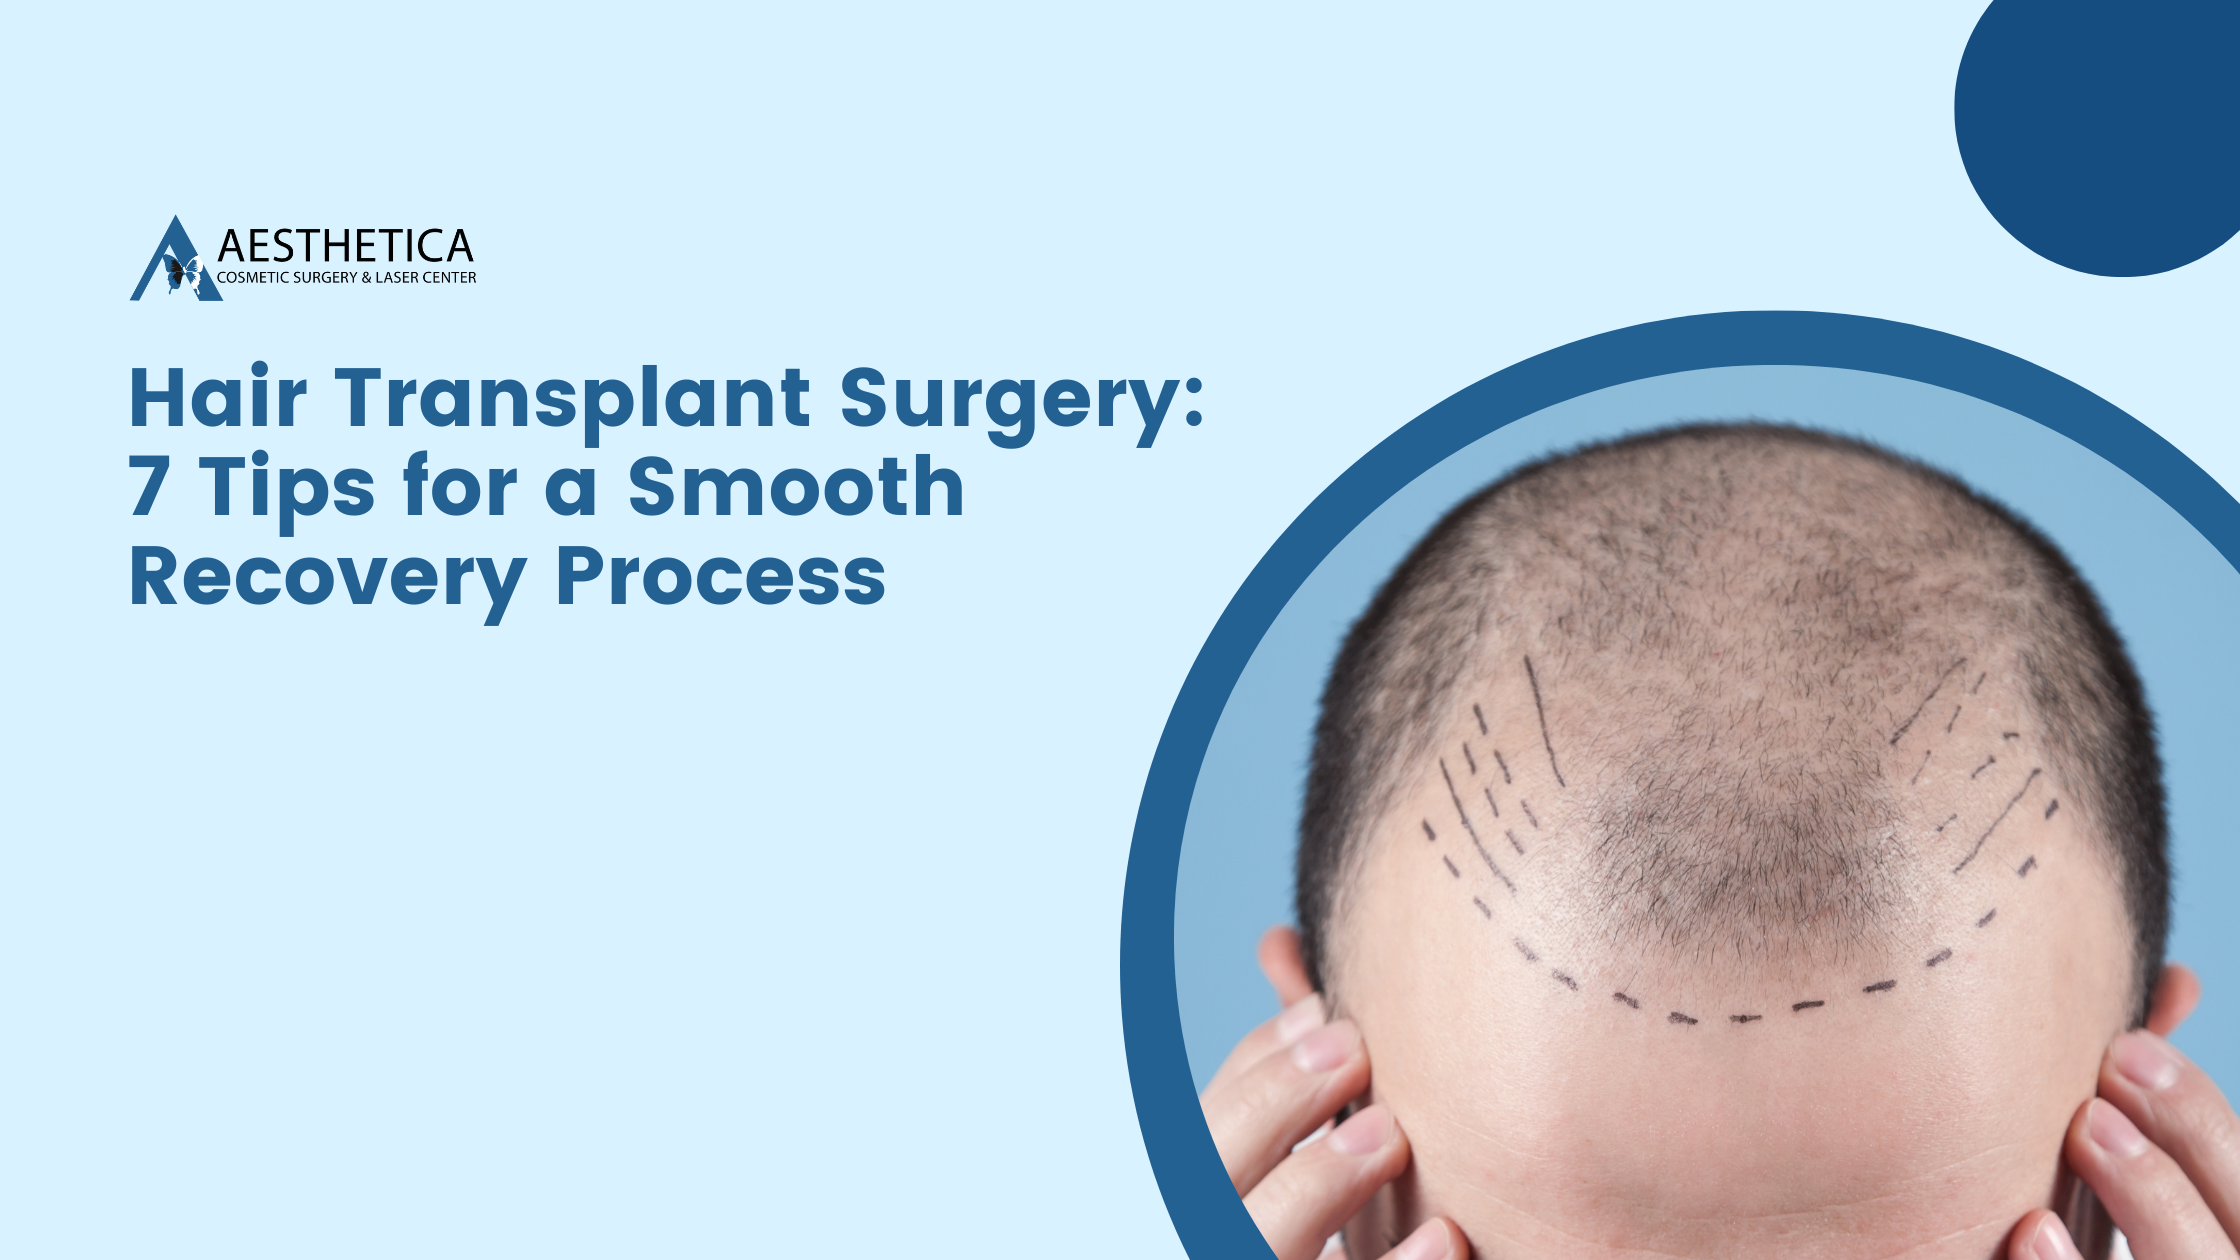 Hair Transplant Surgery: 7 Tips for a Smooth Recovery Process